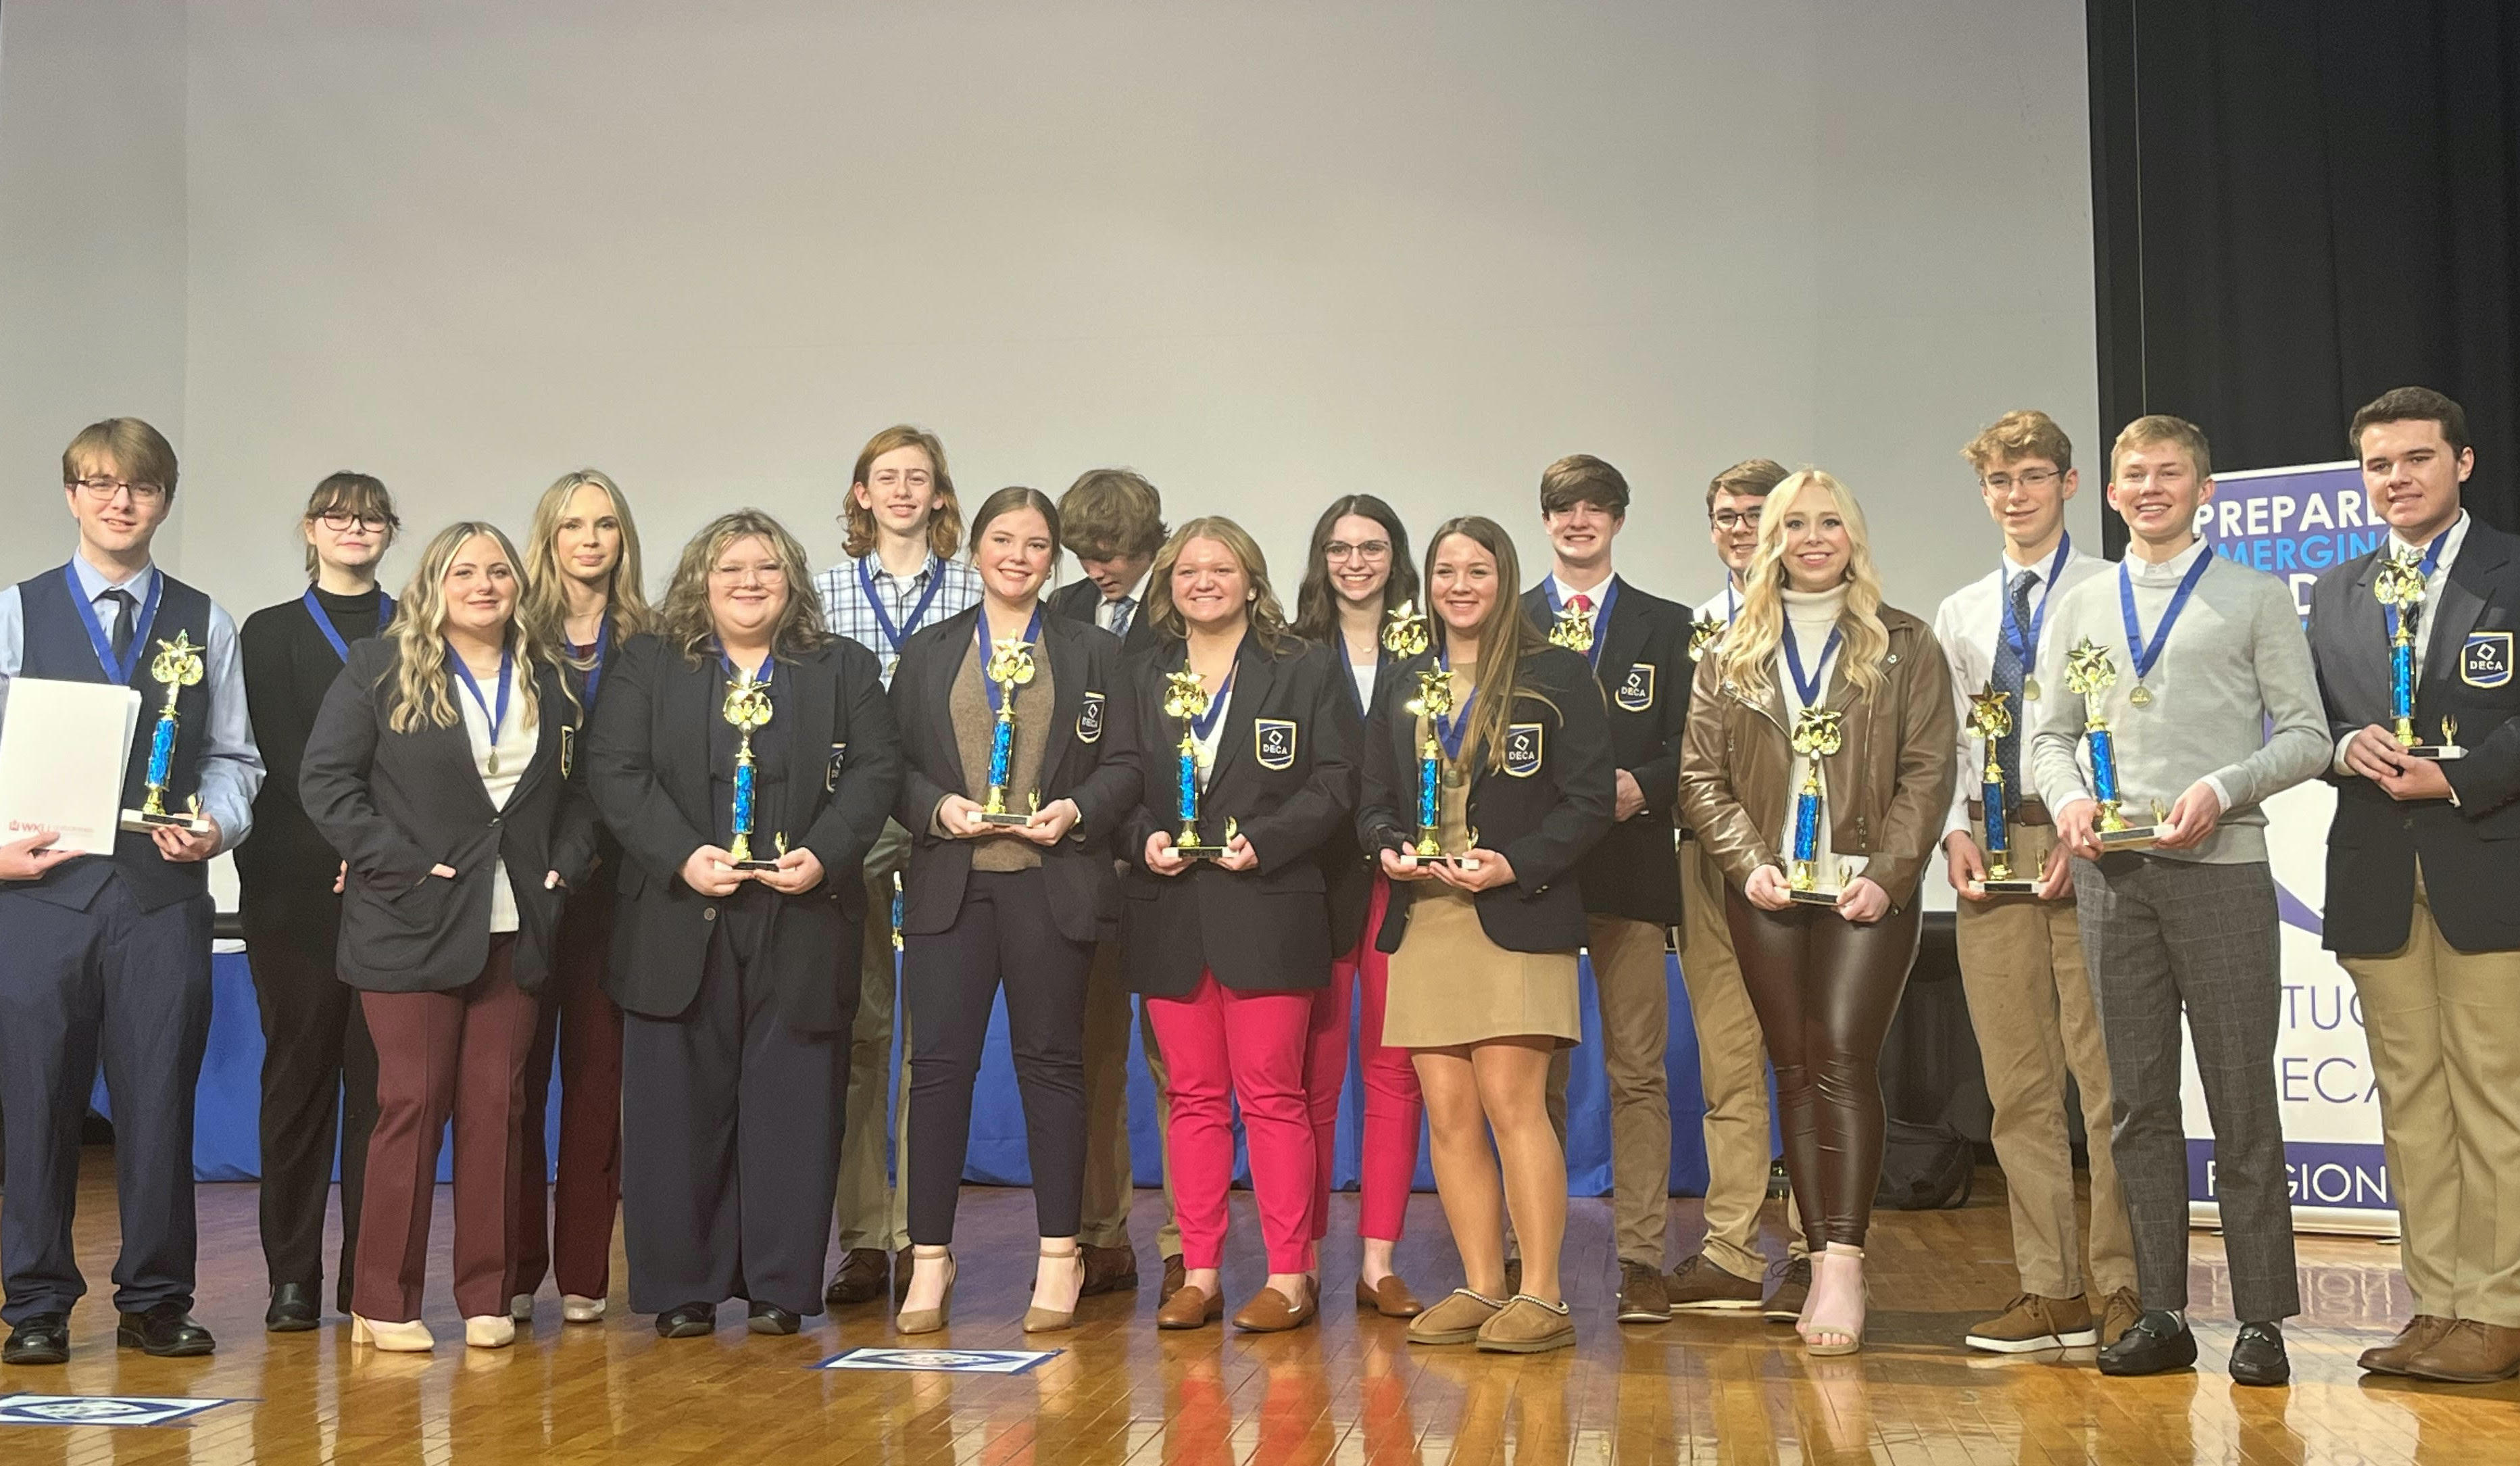 GCHS DECA Region 2 award winners on stage with trophies